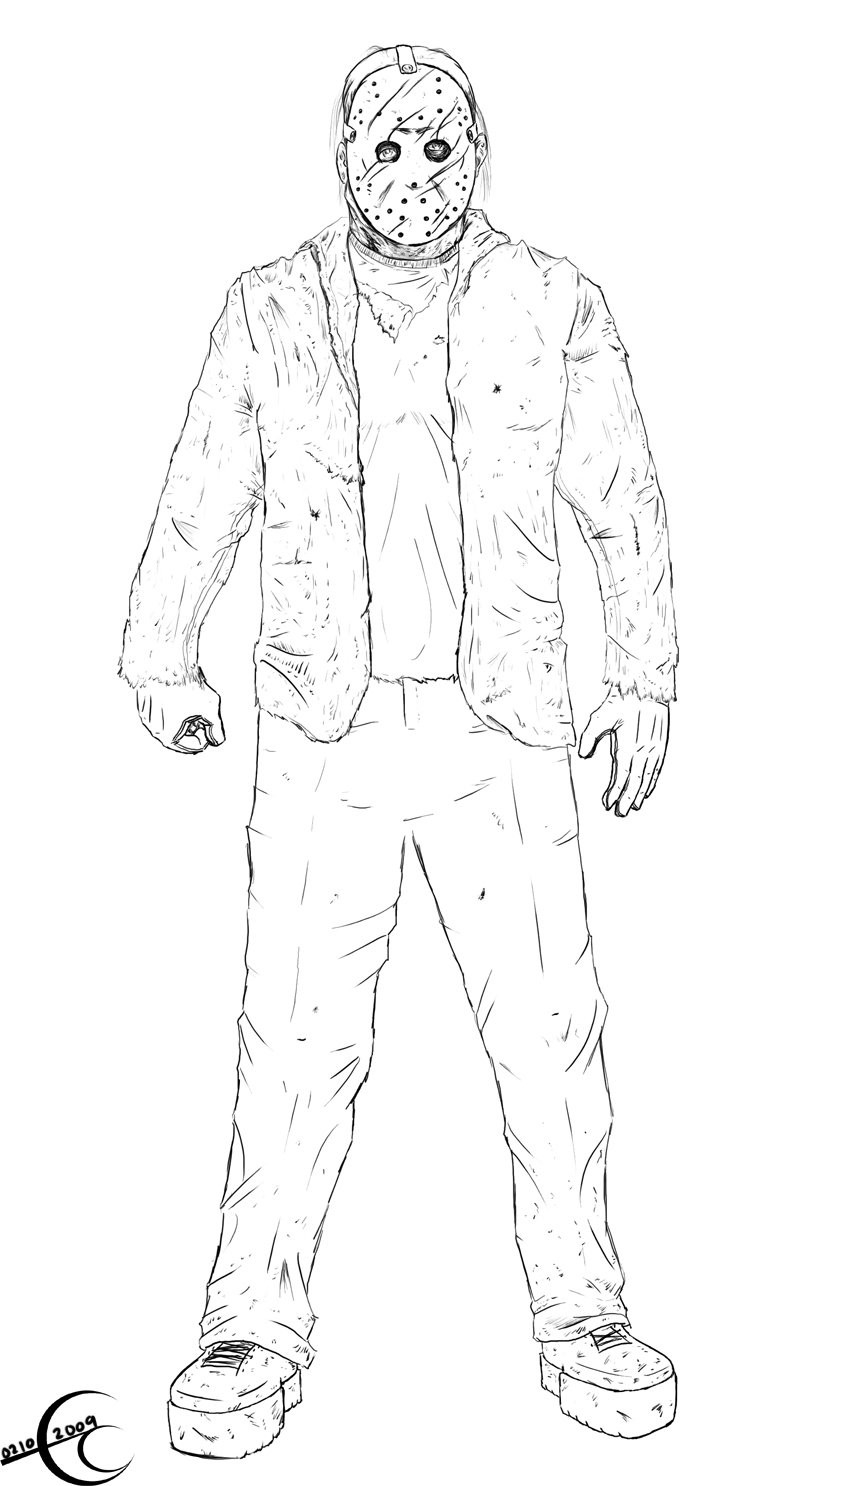 Coloring Pages For Boys Jason Voorhees
 List of Synonyms and Antonyms of the Word jason voorhees